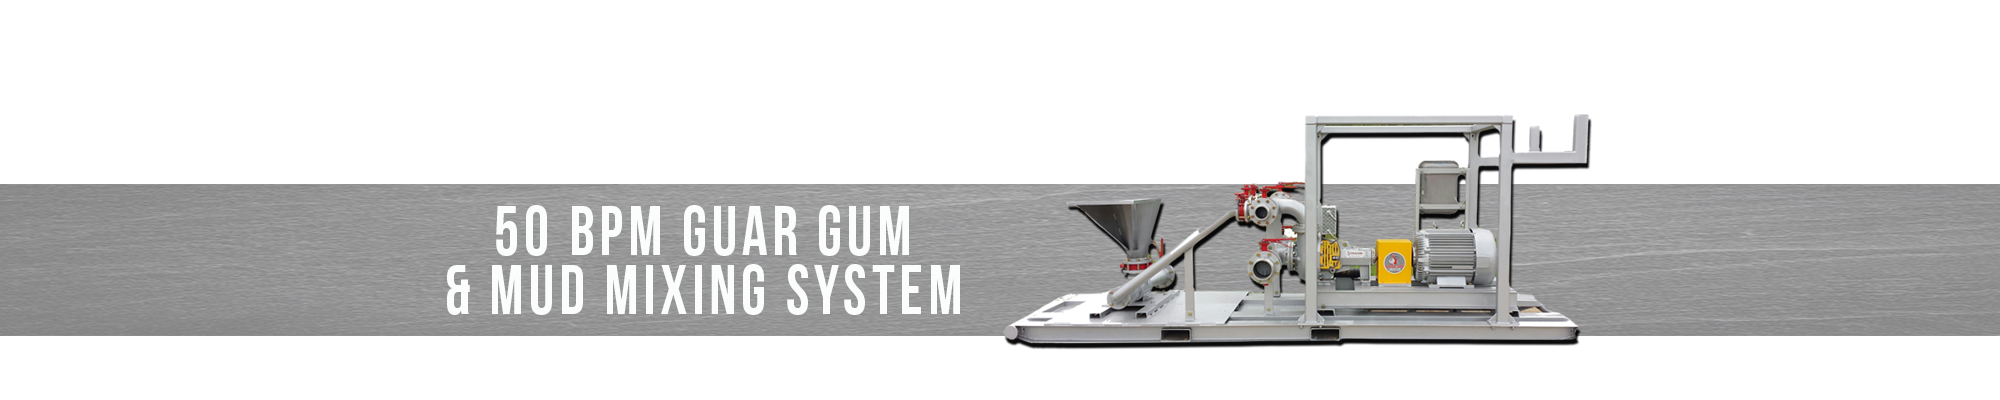 50 BPM Guar Gum and mud mixing system